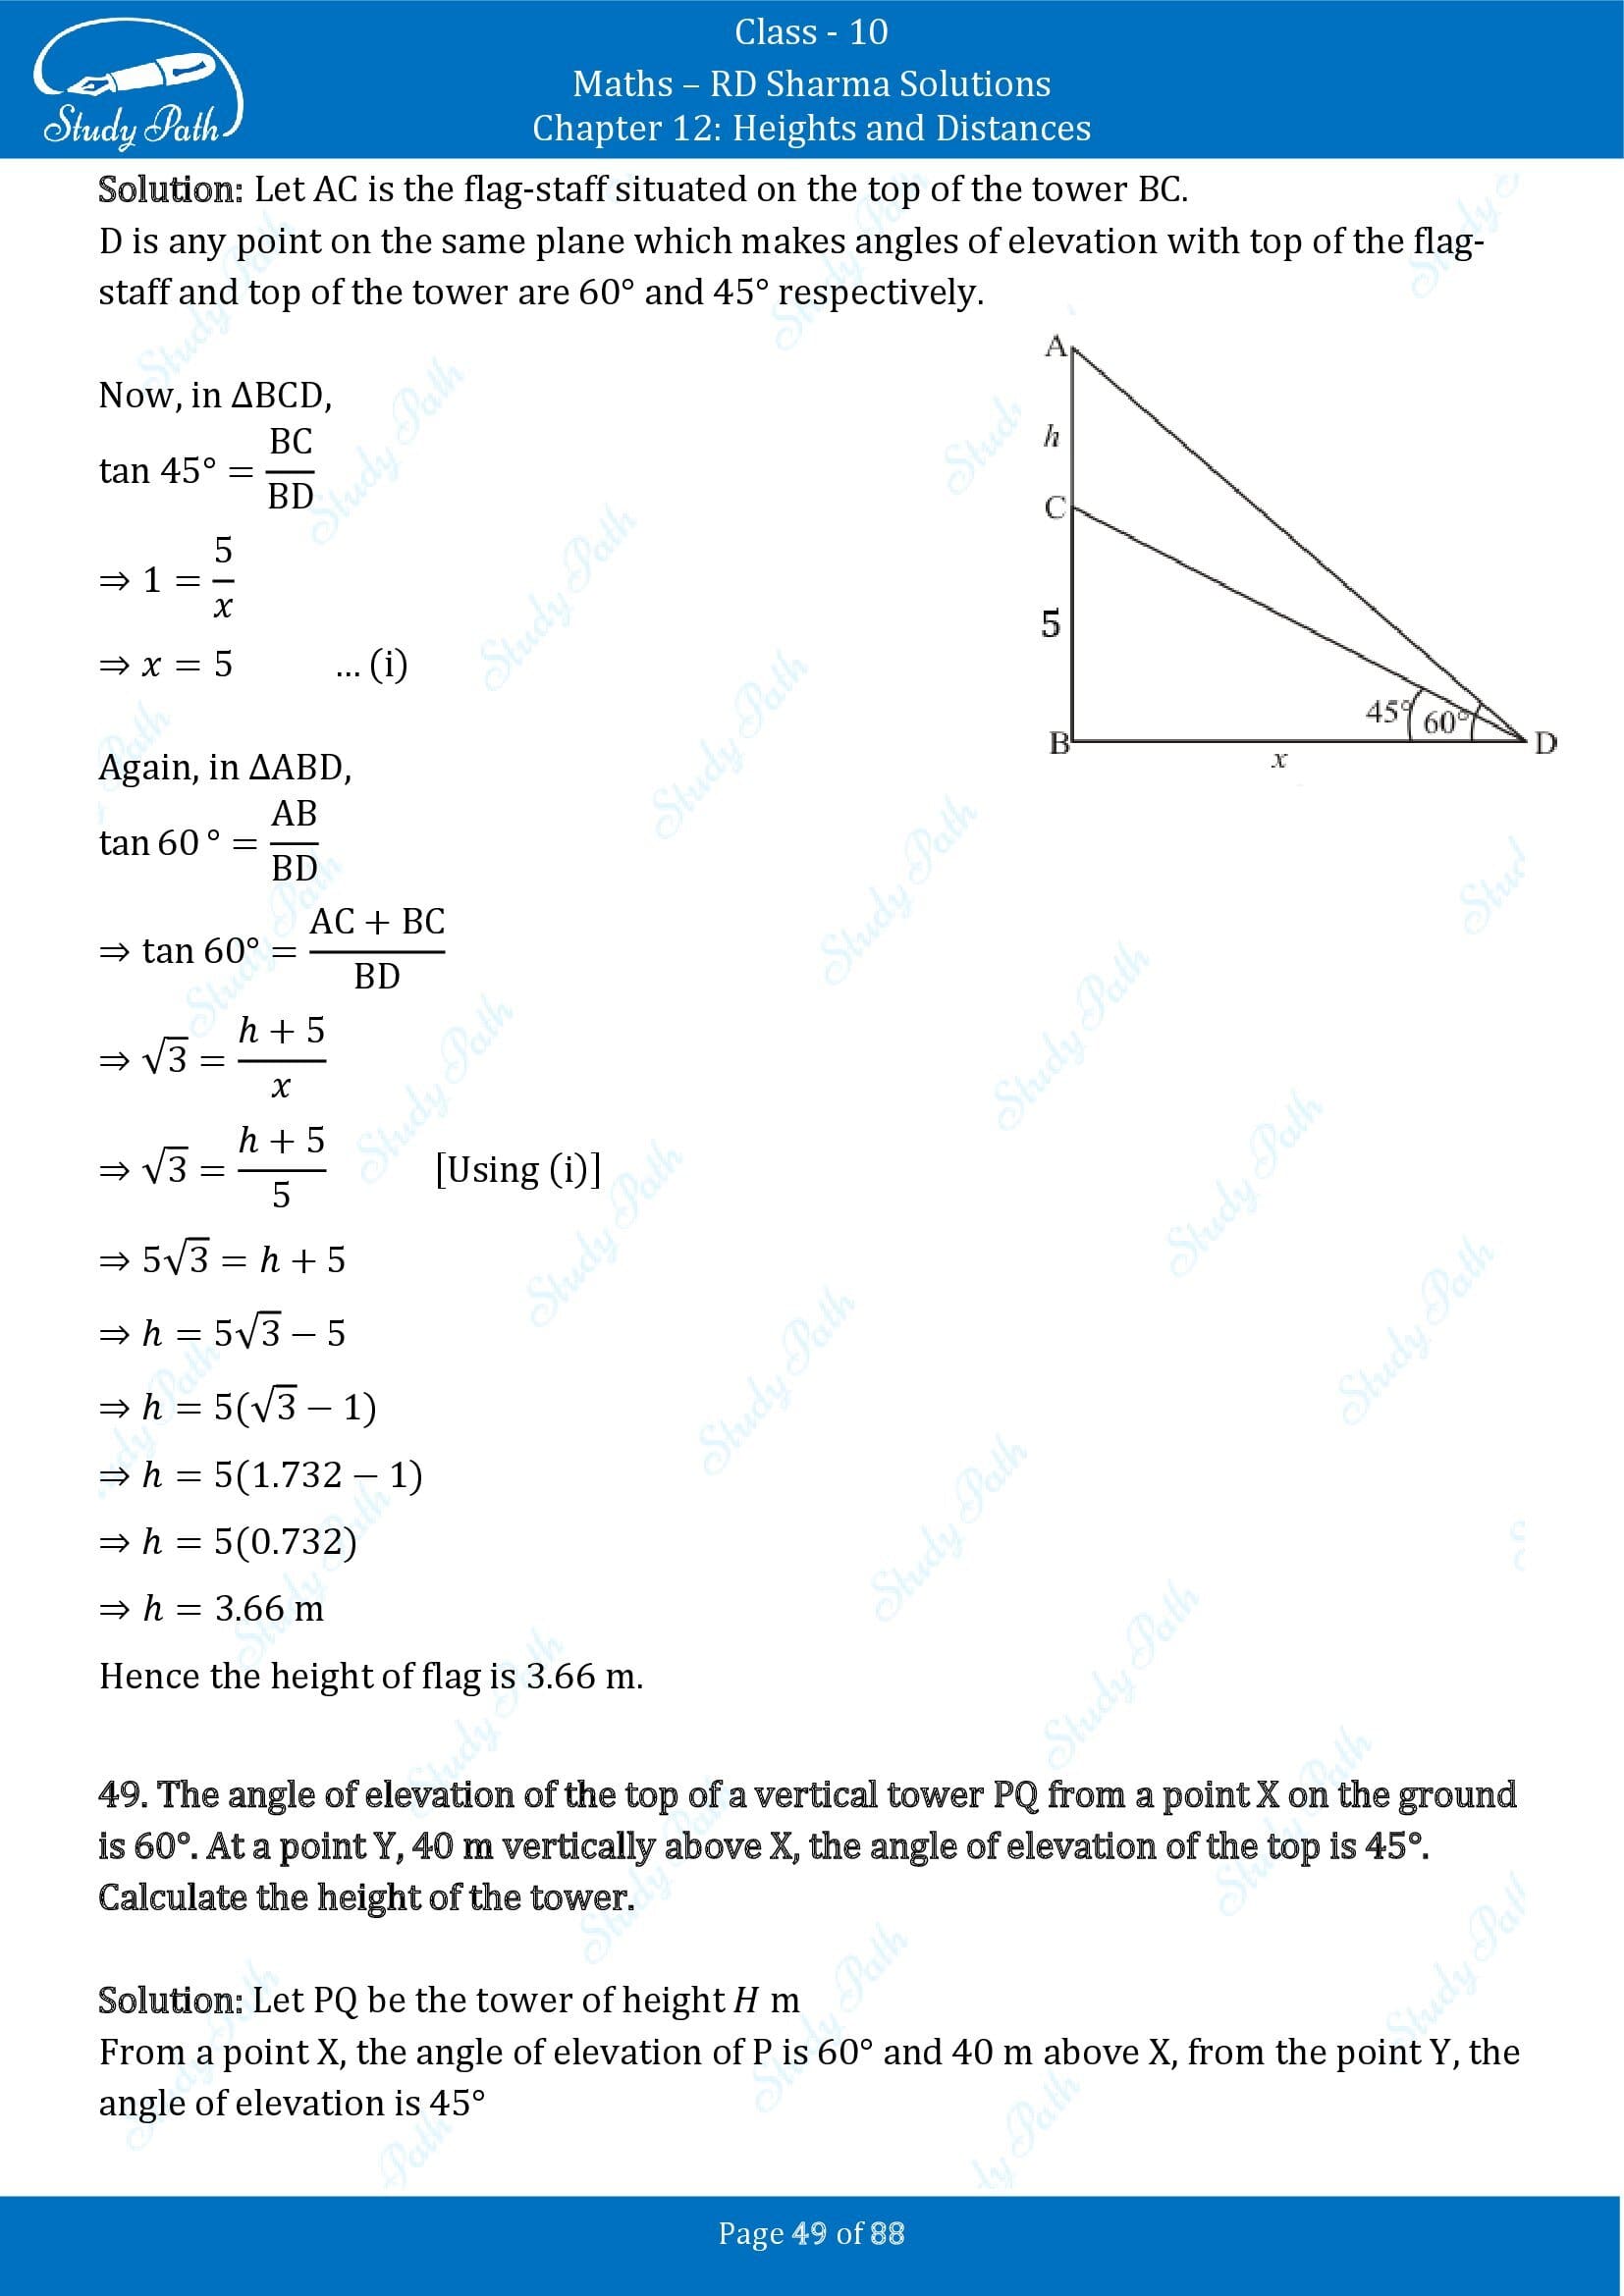 RD Sharma Solutions Class 10 Chapter 12 Heights and Distances Exercise 12.1 00049